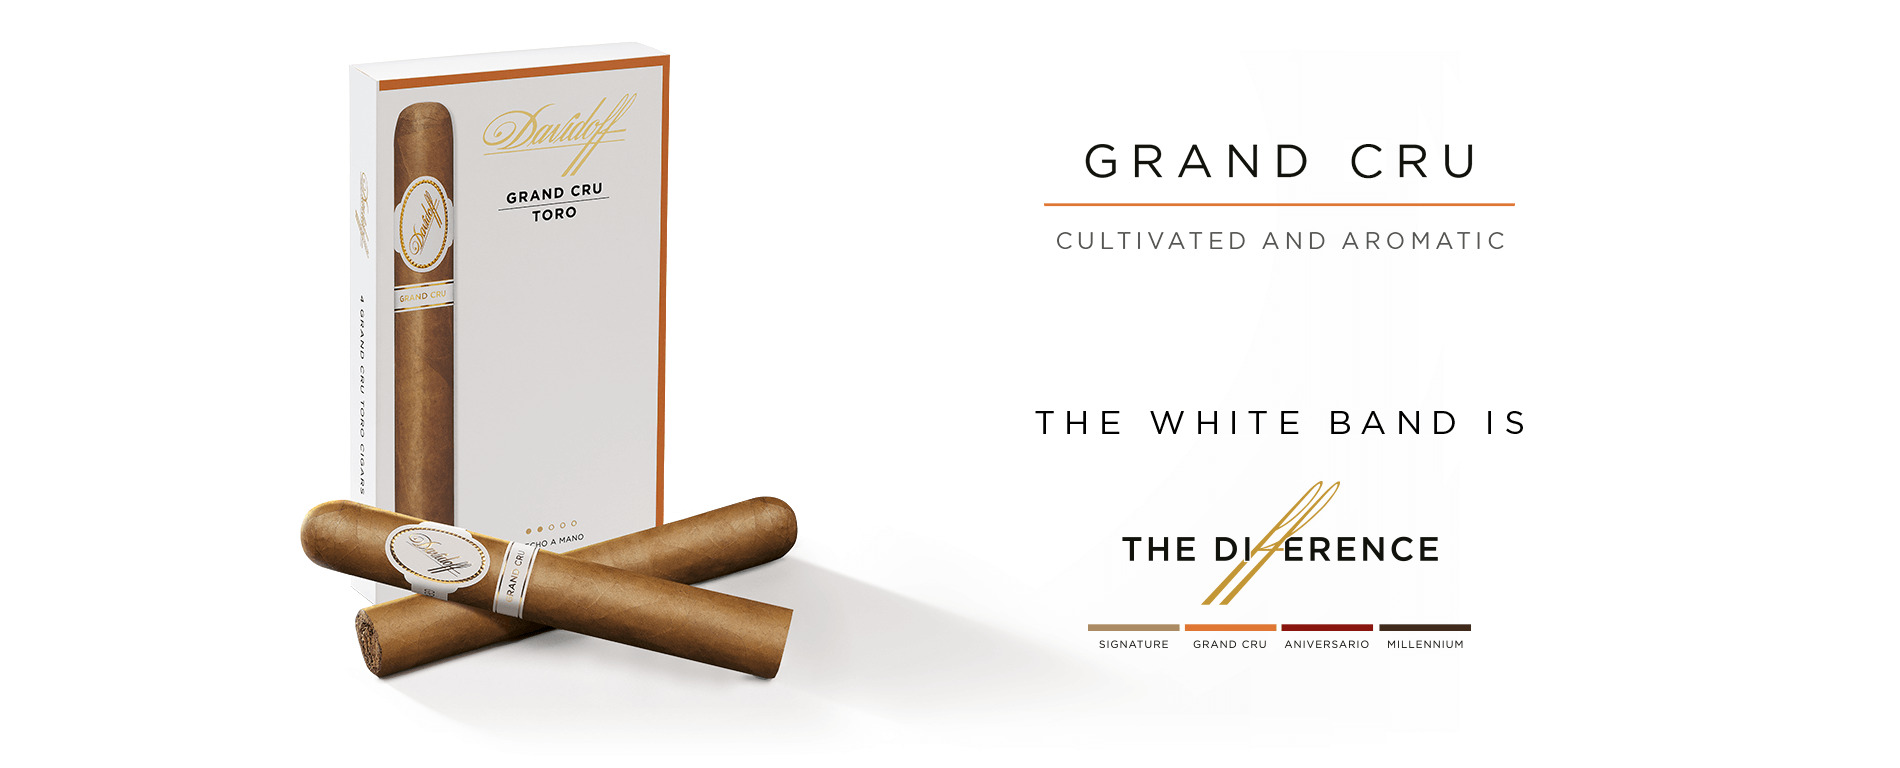 Two Davidoff Grand Cru Toro cigars placed crosswise in front of their box.